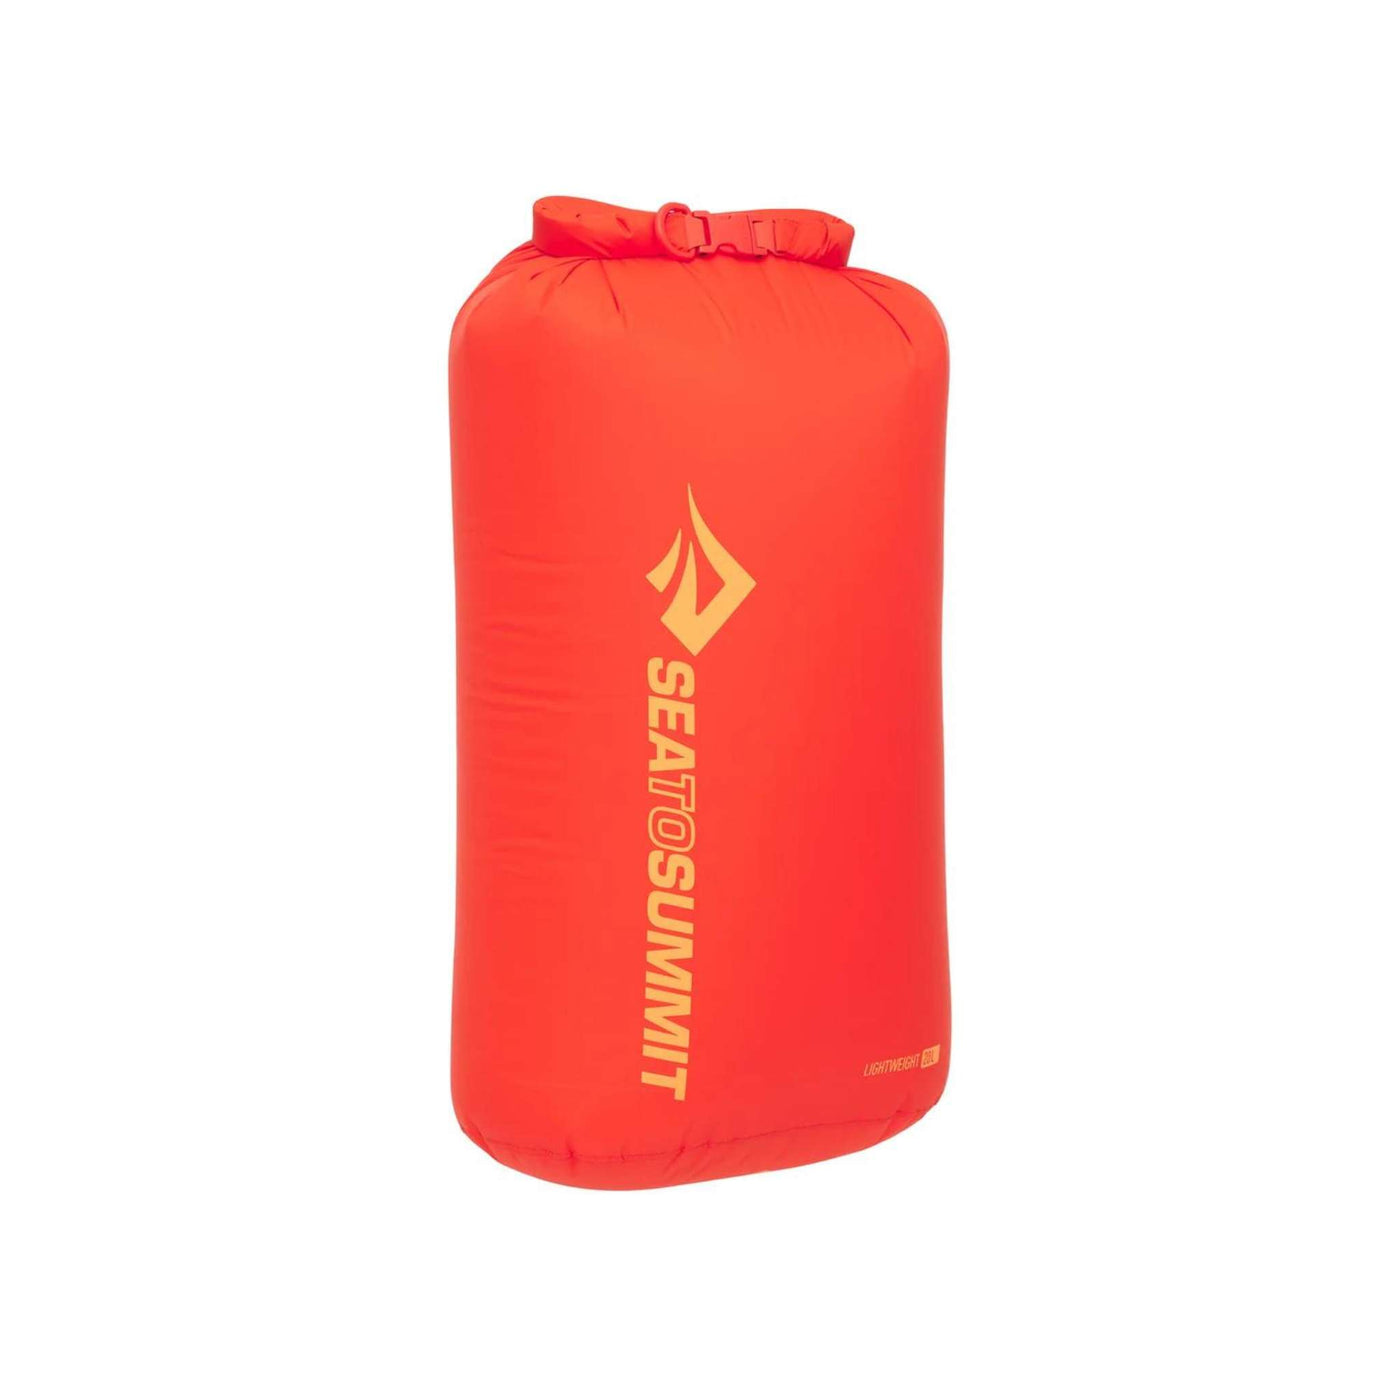 Sea to Summit Lightweight Dry Bag - 20 Litre | Stuff Sacks and Dry Bags | Further Faster Christchurch NZ | #spicy-orange